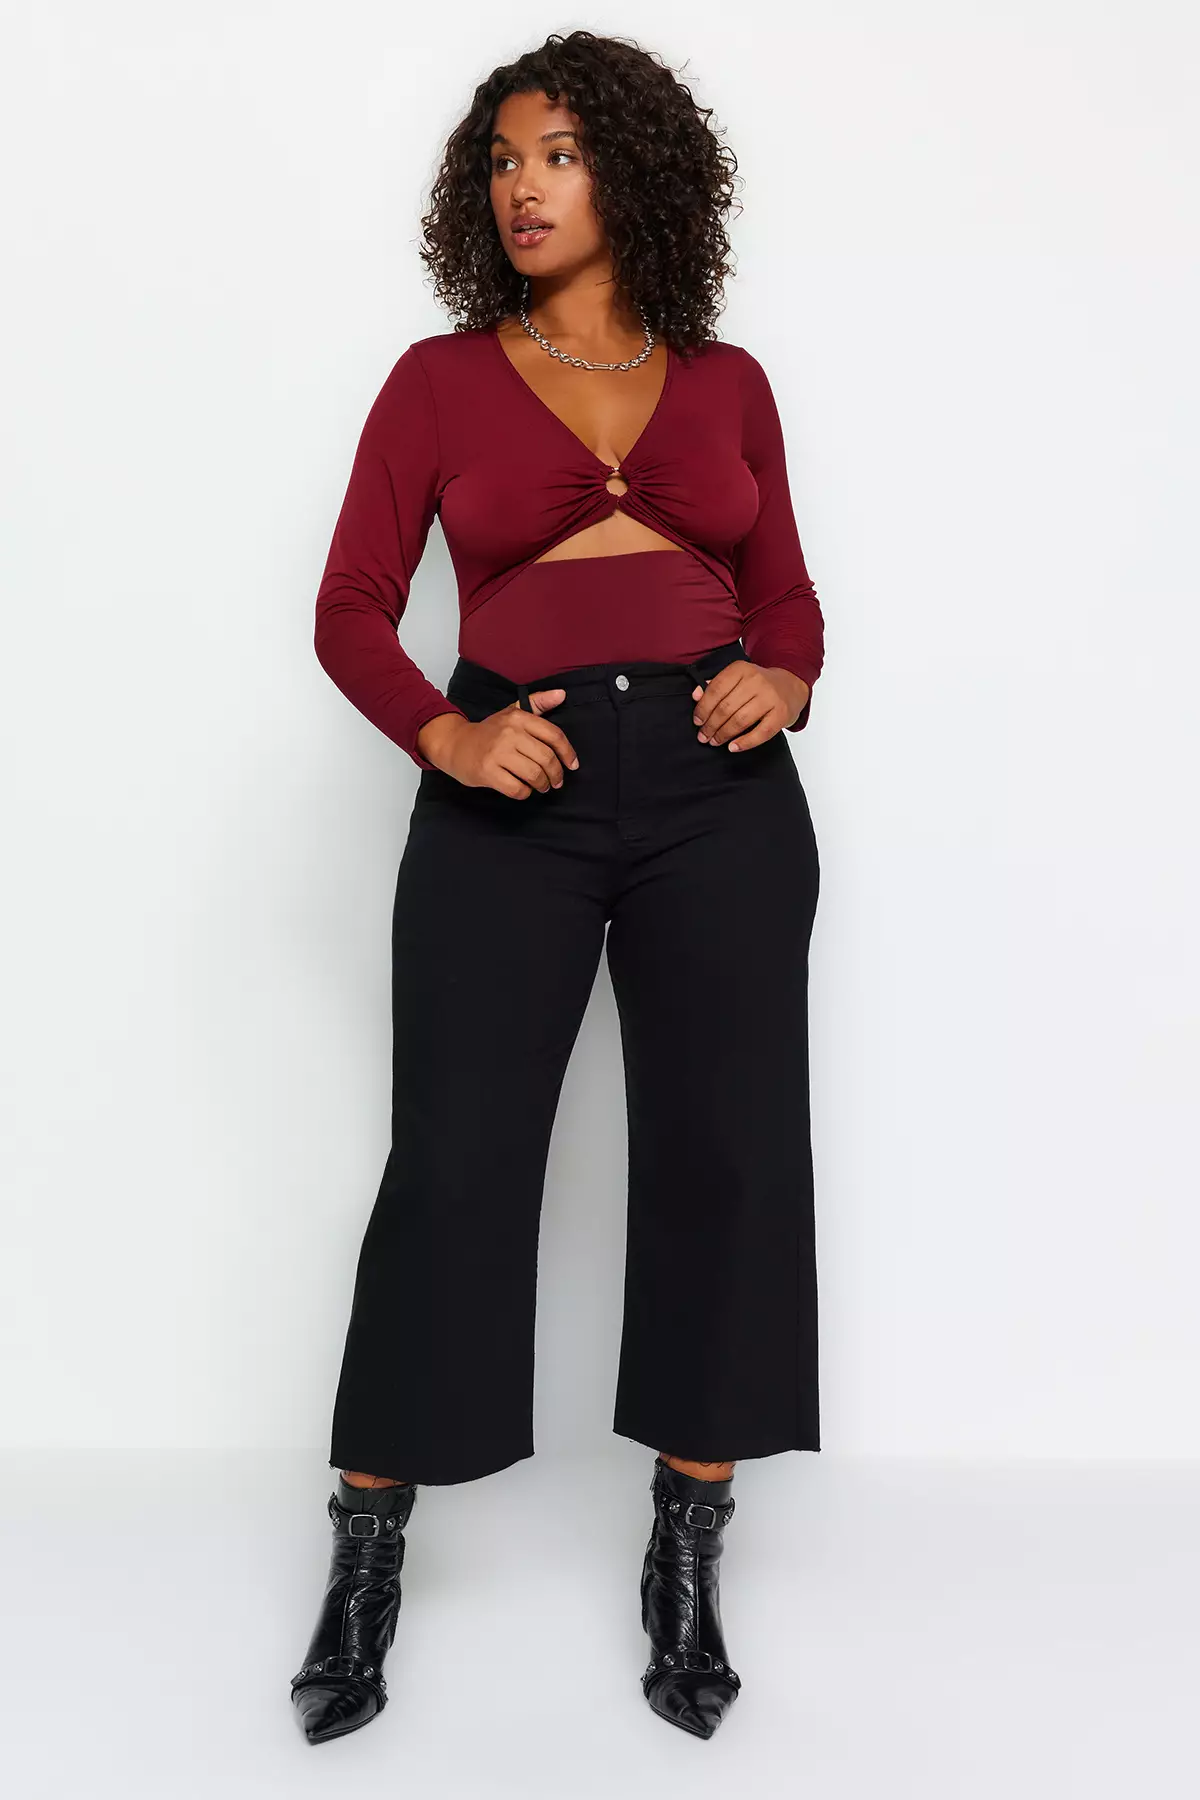 PLUS Size Black 3/4 Pants, Women's Fashion, Bottoms, Other Bottoms on  Carousell